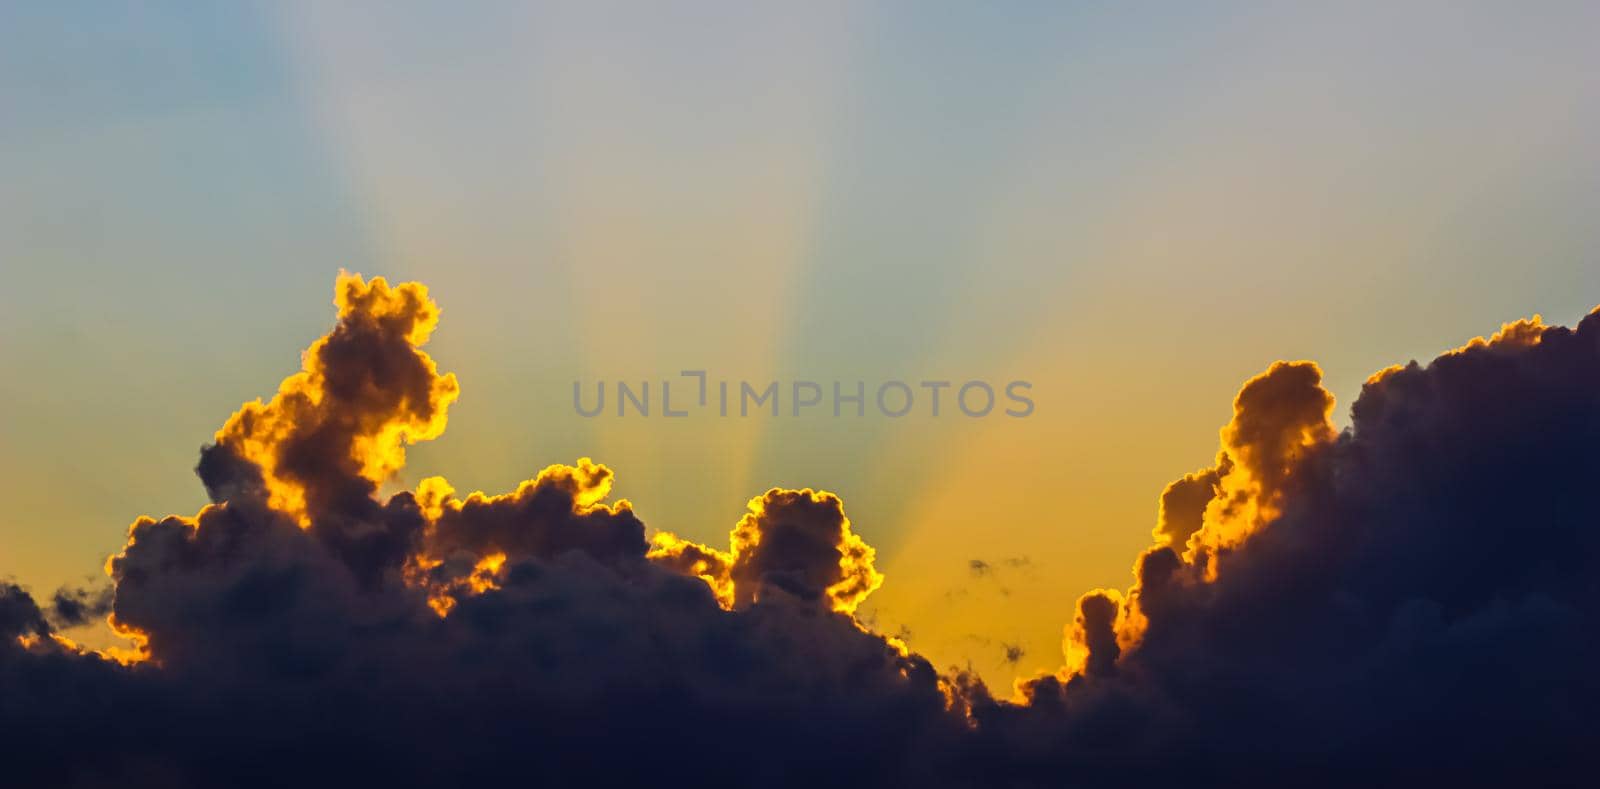 Background from a beautiful sunset with clouds and sunlights over mountanous coast by Olayola